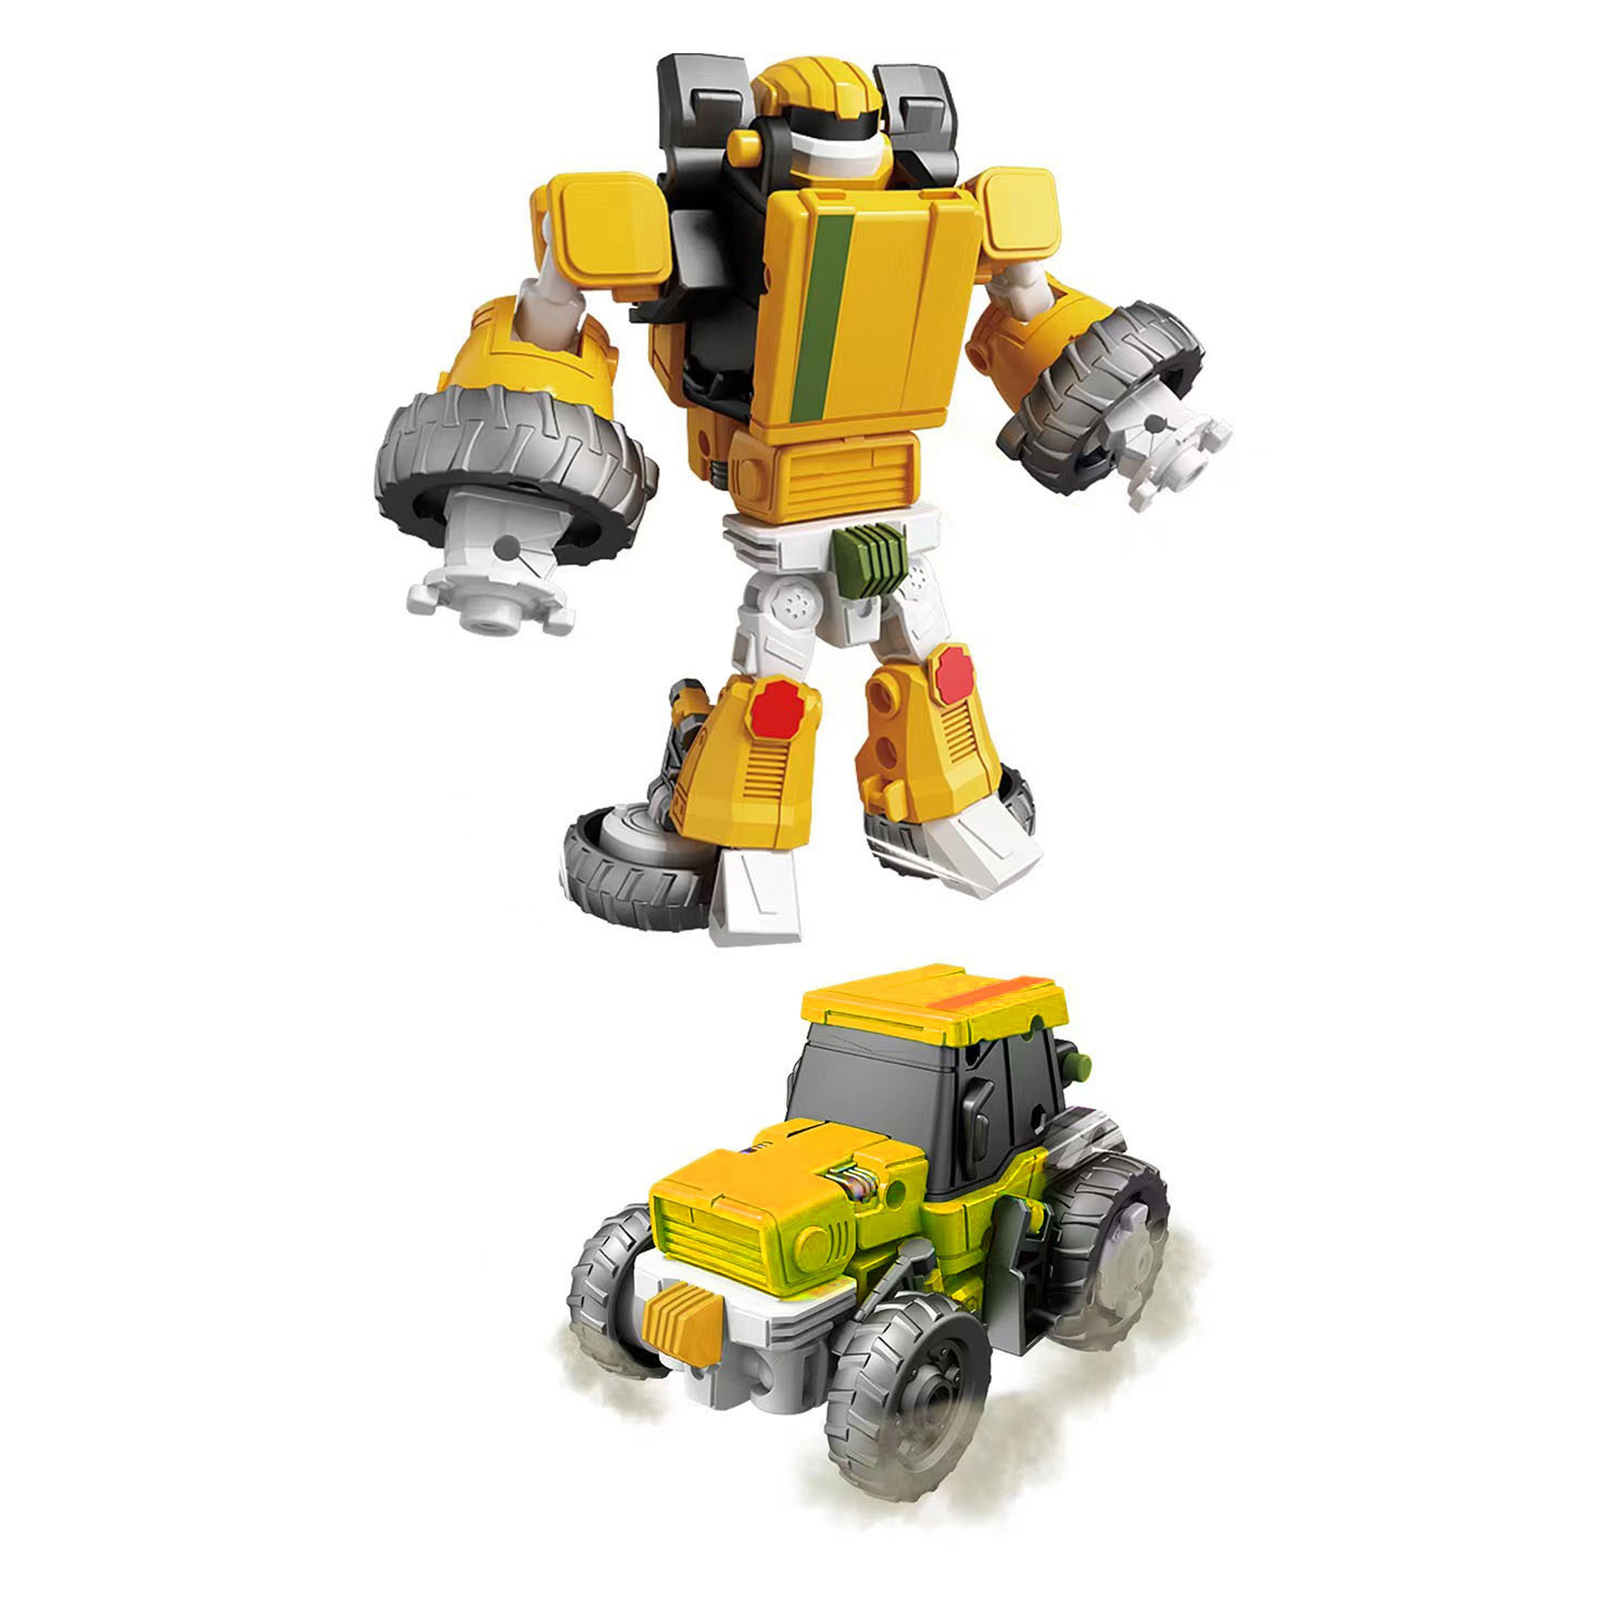 Biplut Transform Car Robot Vehicles Toy Robot Transformer Toy Various Style Aircraft Tractor Tank Train Cartoon Model Toy Collectible -15cm Robot Transforming for Children Birthday Gift (Light Yellow) - image 1 of 13